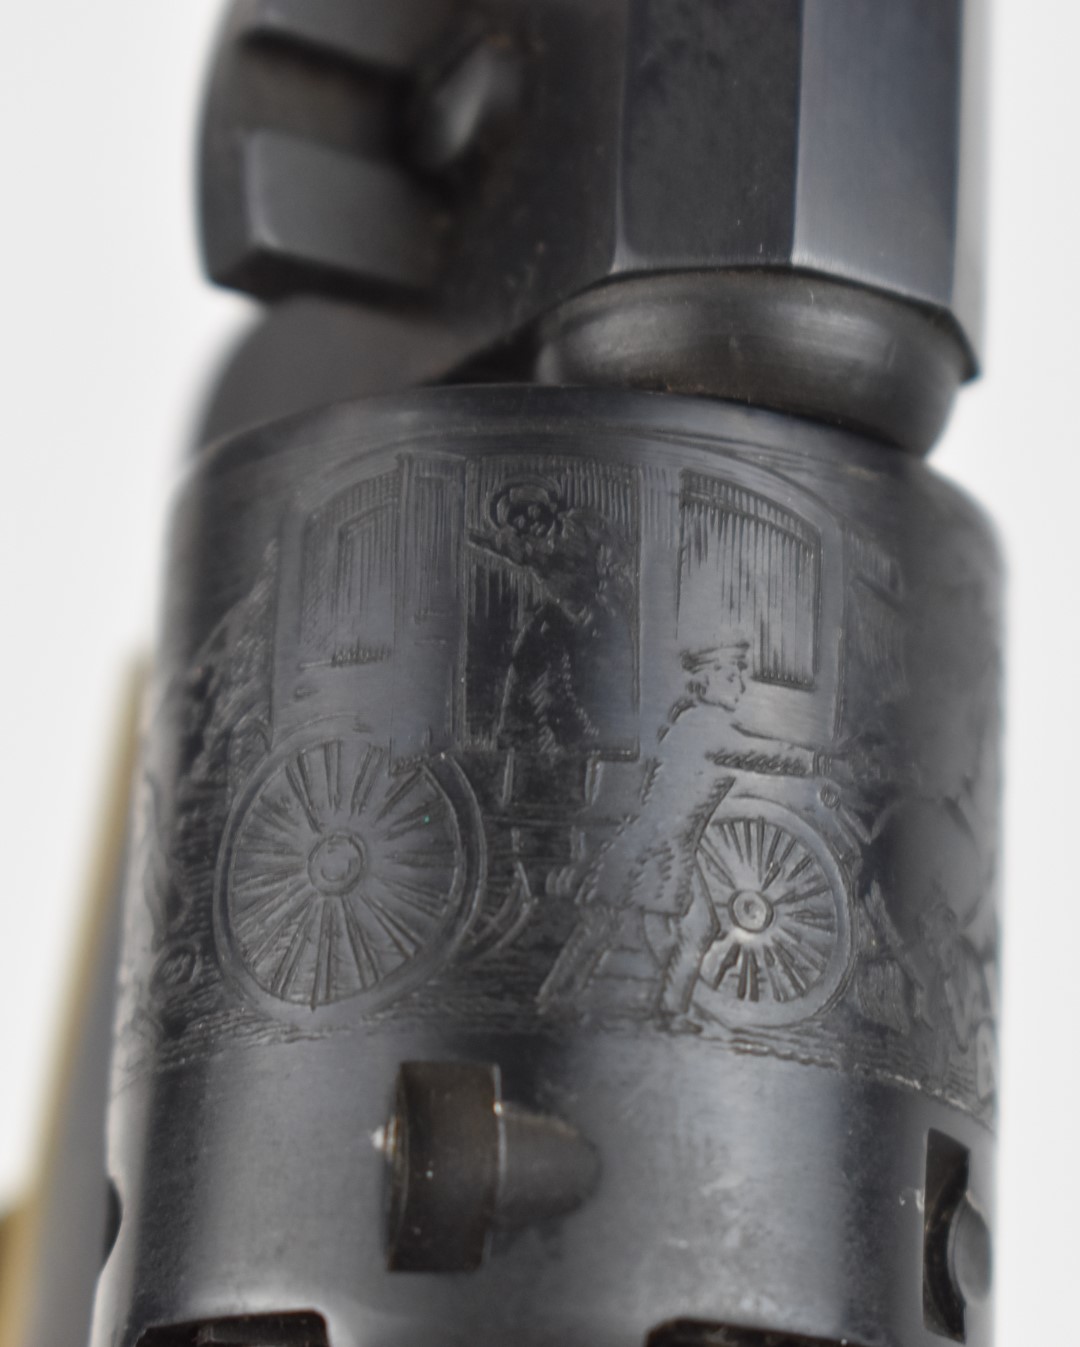 Italian Colt style blank firing five-shot single action revolver with engraved scenes of ships - Image 12 of 13